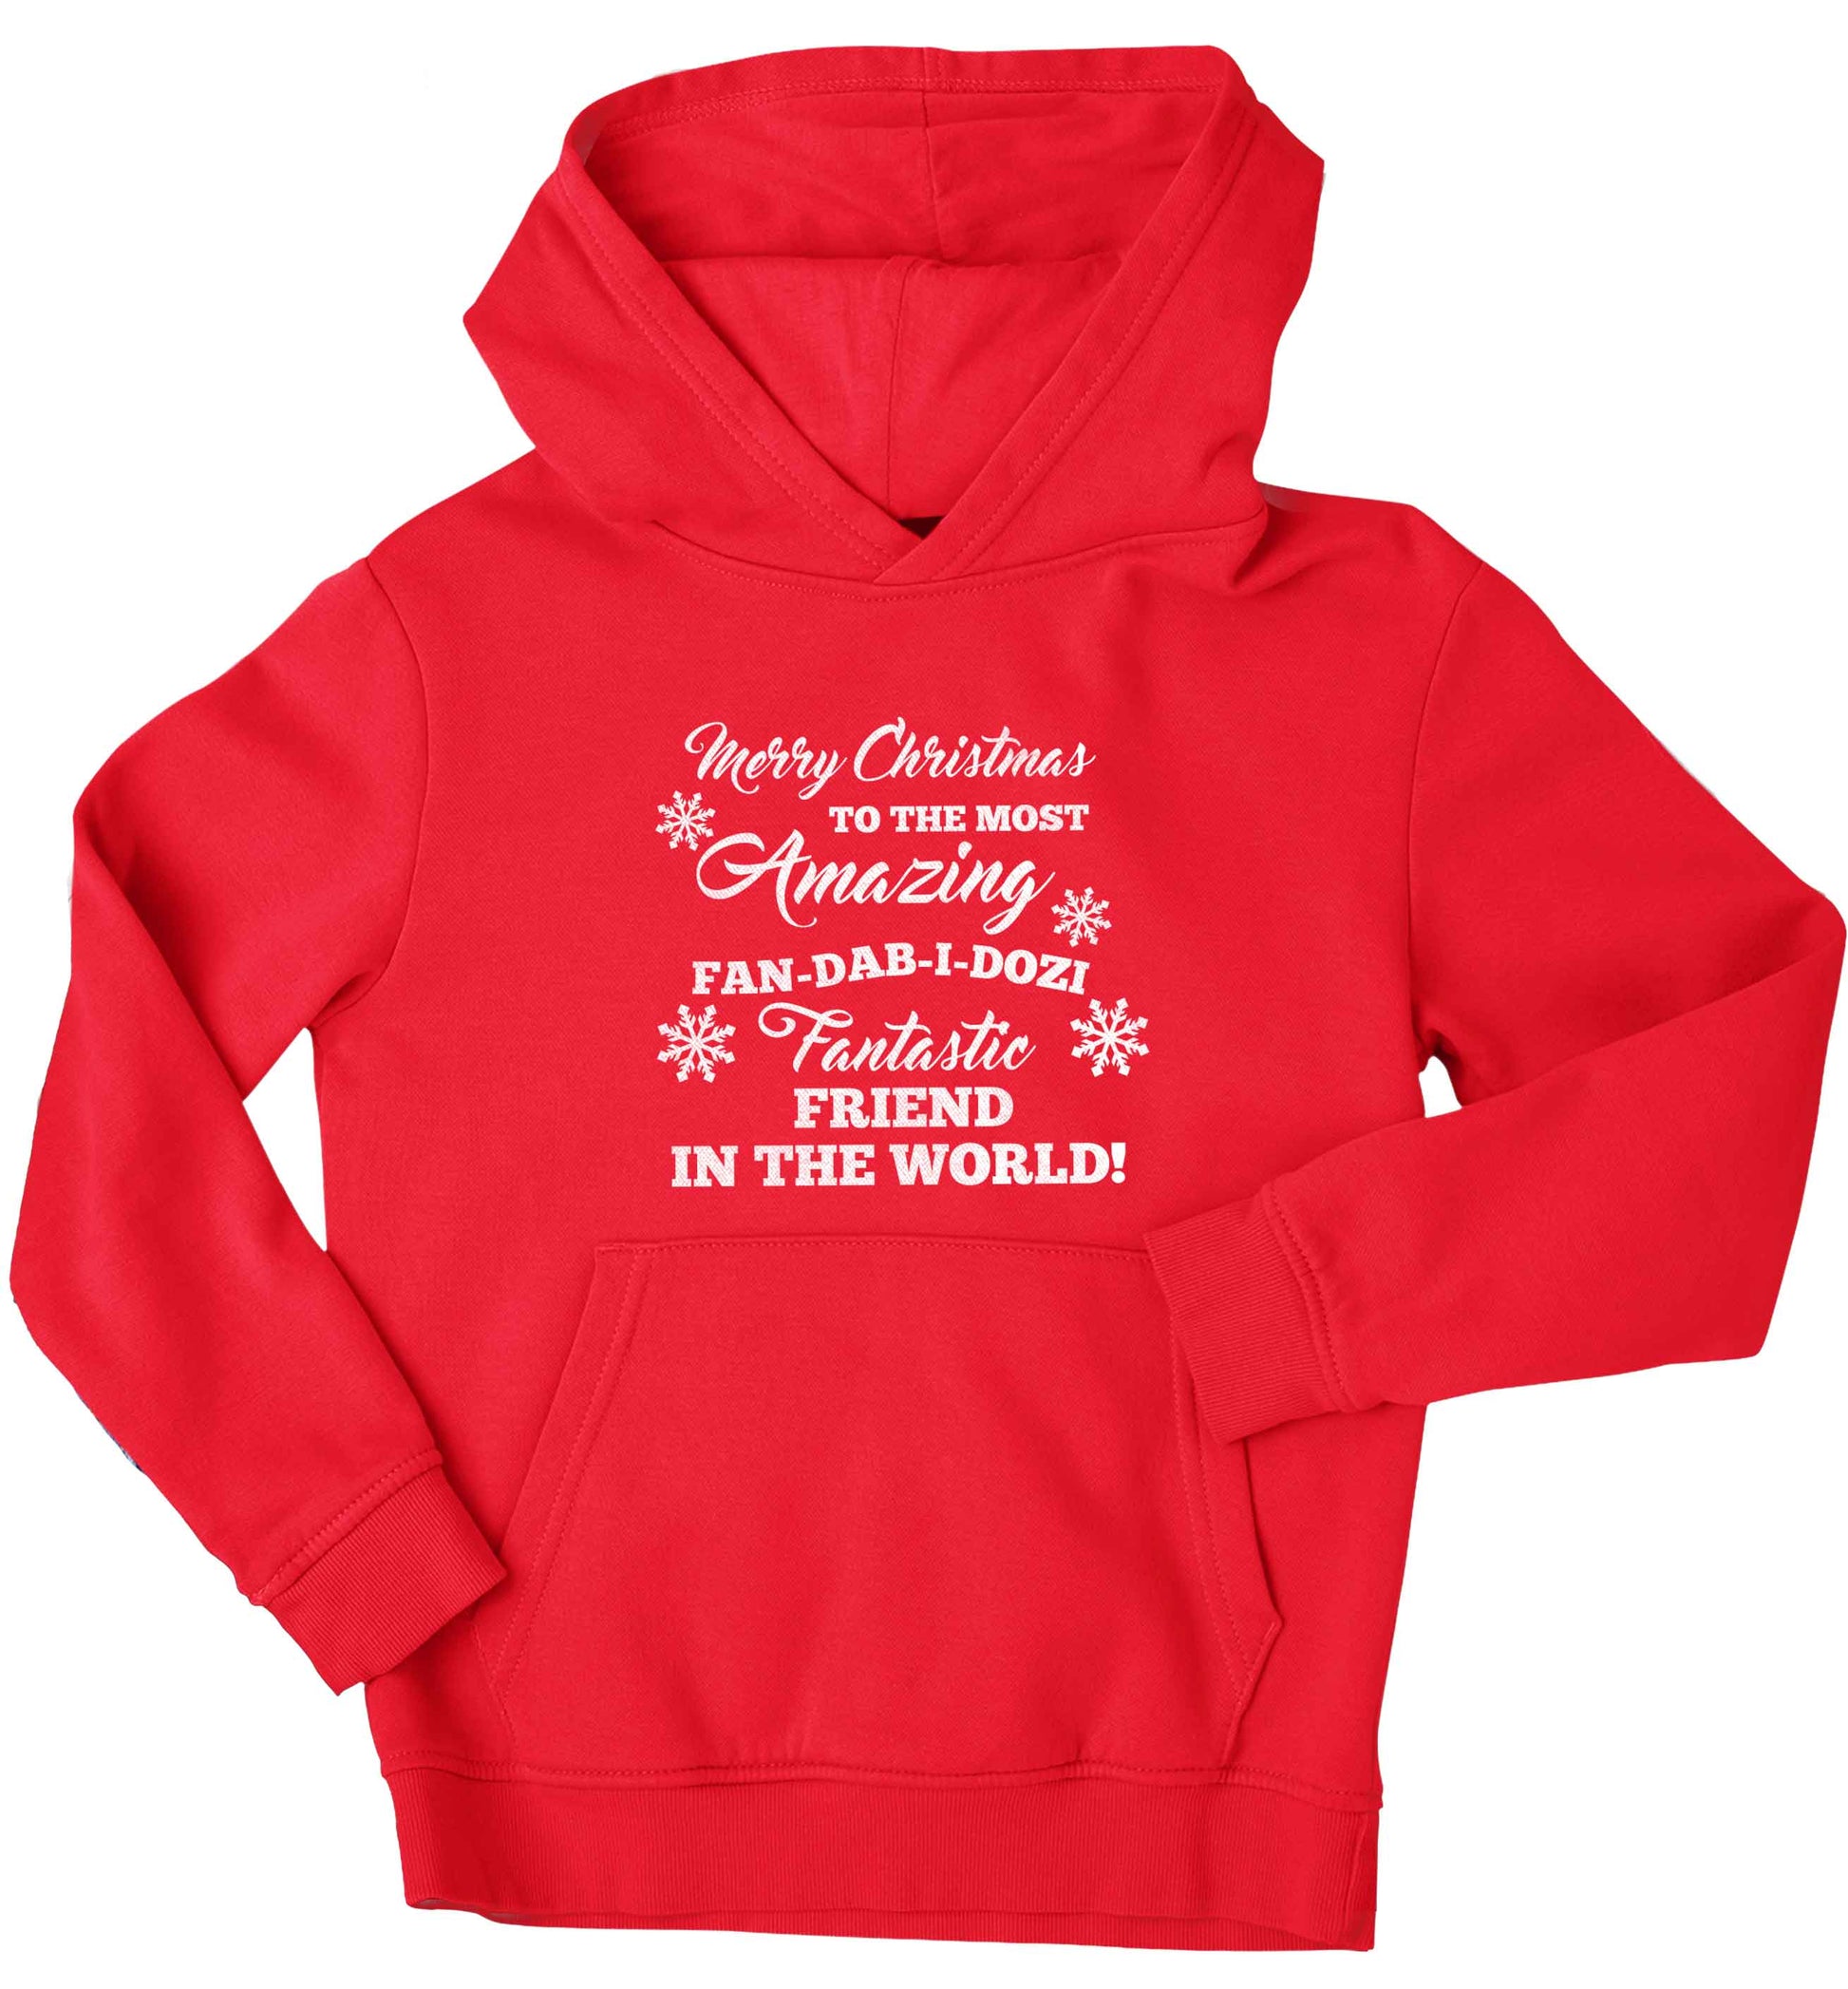 Merry Christmas to the most amazing fan-dab-i-dozi fantasic friend in the world children's red hoodie 12-13 Years